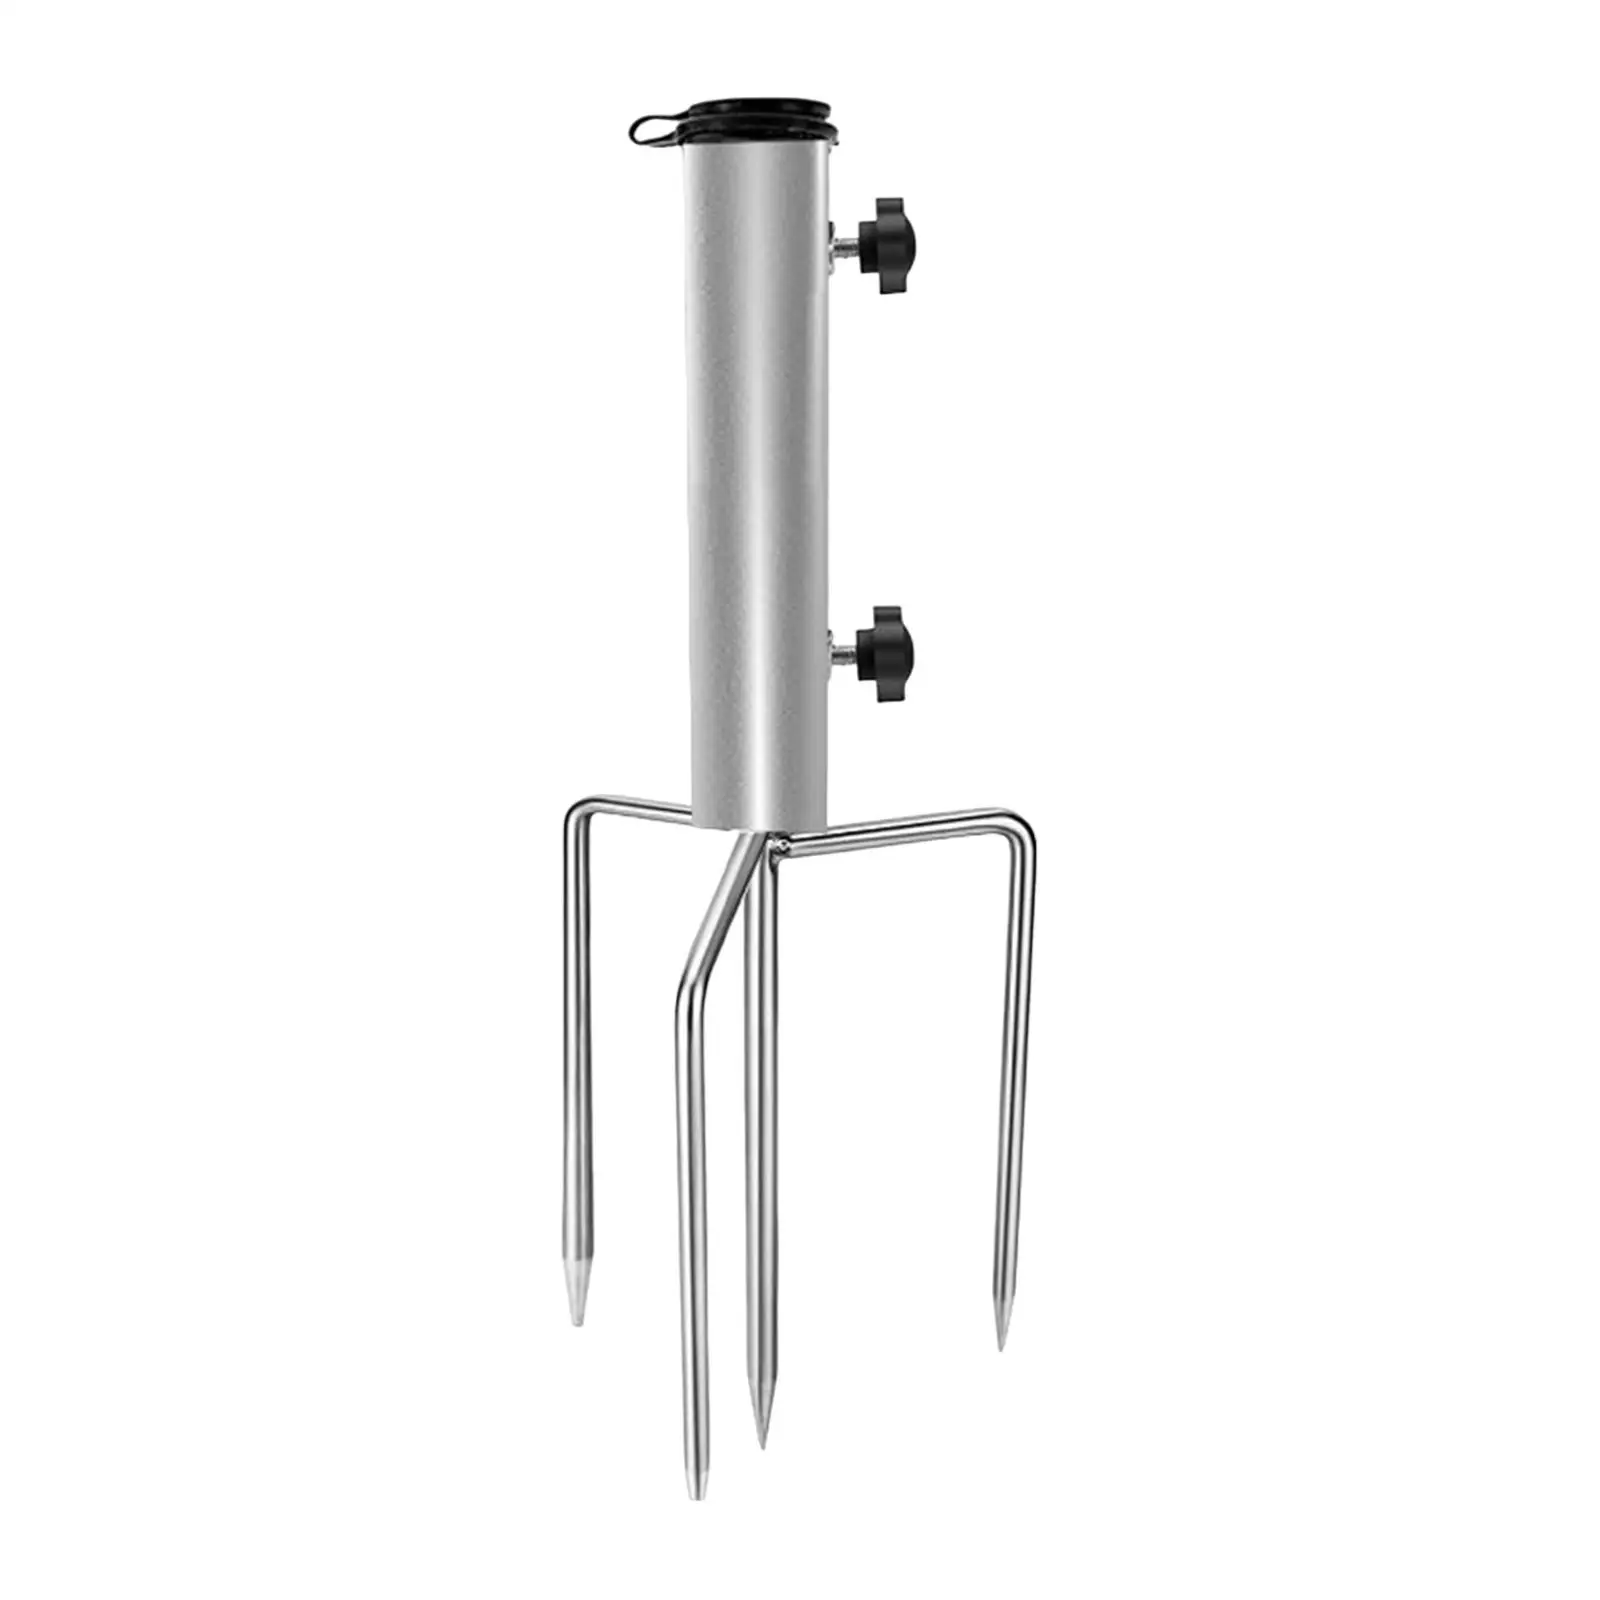 Parasol Ground Anchor Durable with 4 Spikes Insert Plug Heavy Duty Stable Umbrella Base Stand for Lawn Hiking BBQ Yard Outdoor